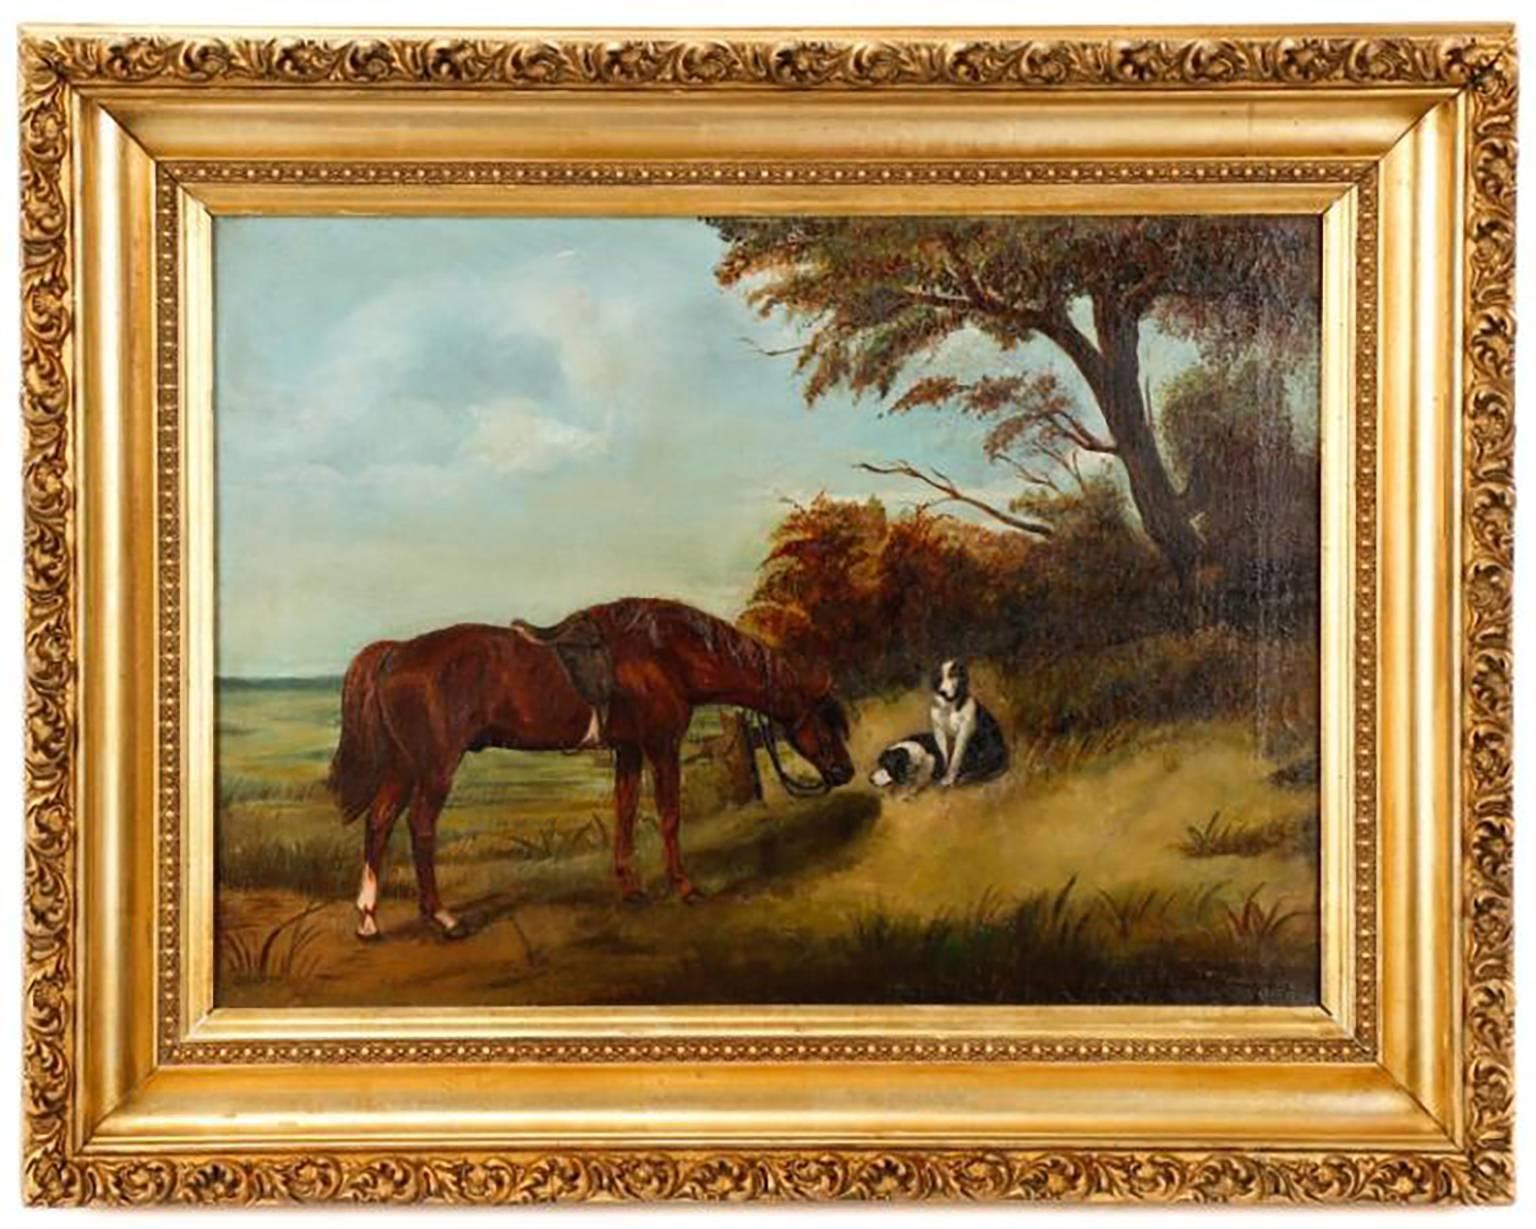 Beautiful Oil Painting by the distinguished British Artist John Frederick Herring Sr. (1795 – 1865)  Oil on Canvas  Titled Horse and Hound at Pasture Housed in a Gorgeous Original Gold Gilt Frame  Dimensions: Framed approximately 32.25″ x 25.25″;